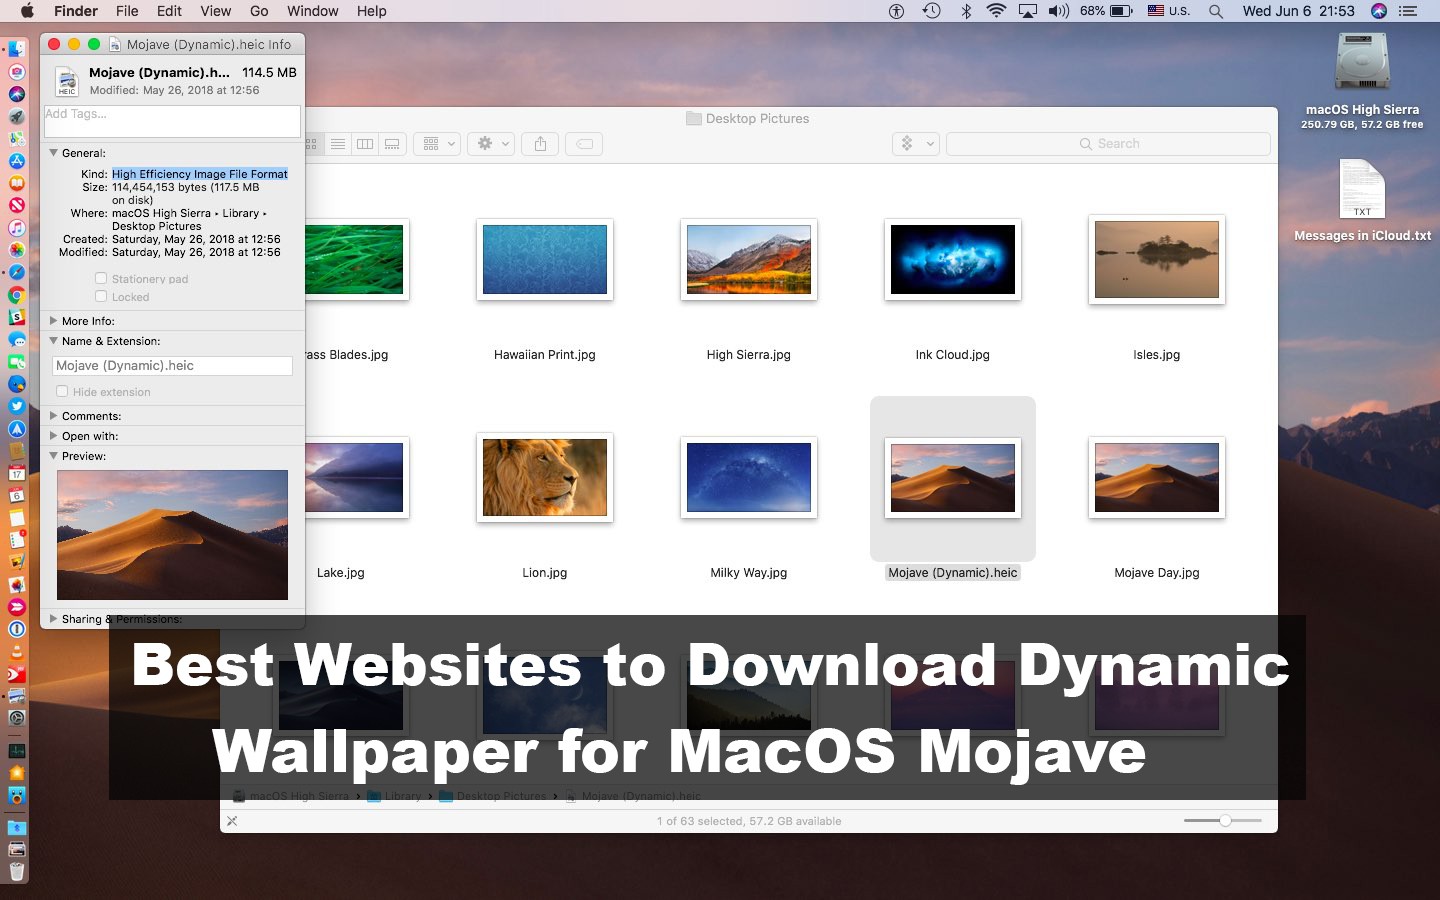 Best Websites to Download Dynamic Wallpaper for MacOS Mojave